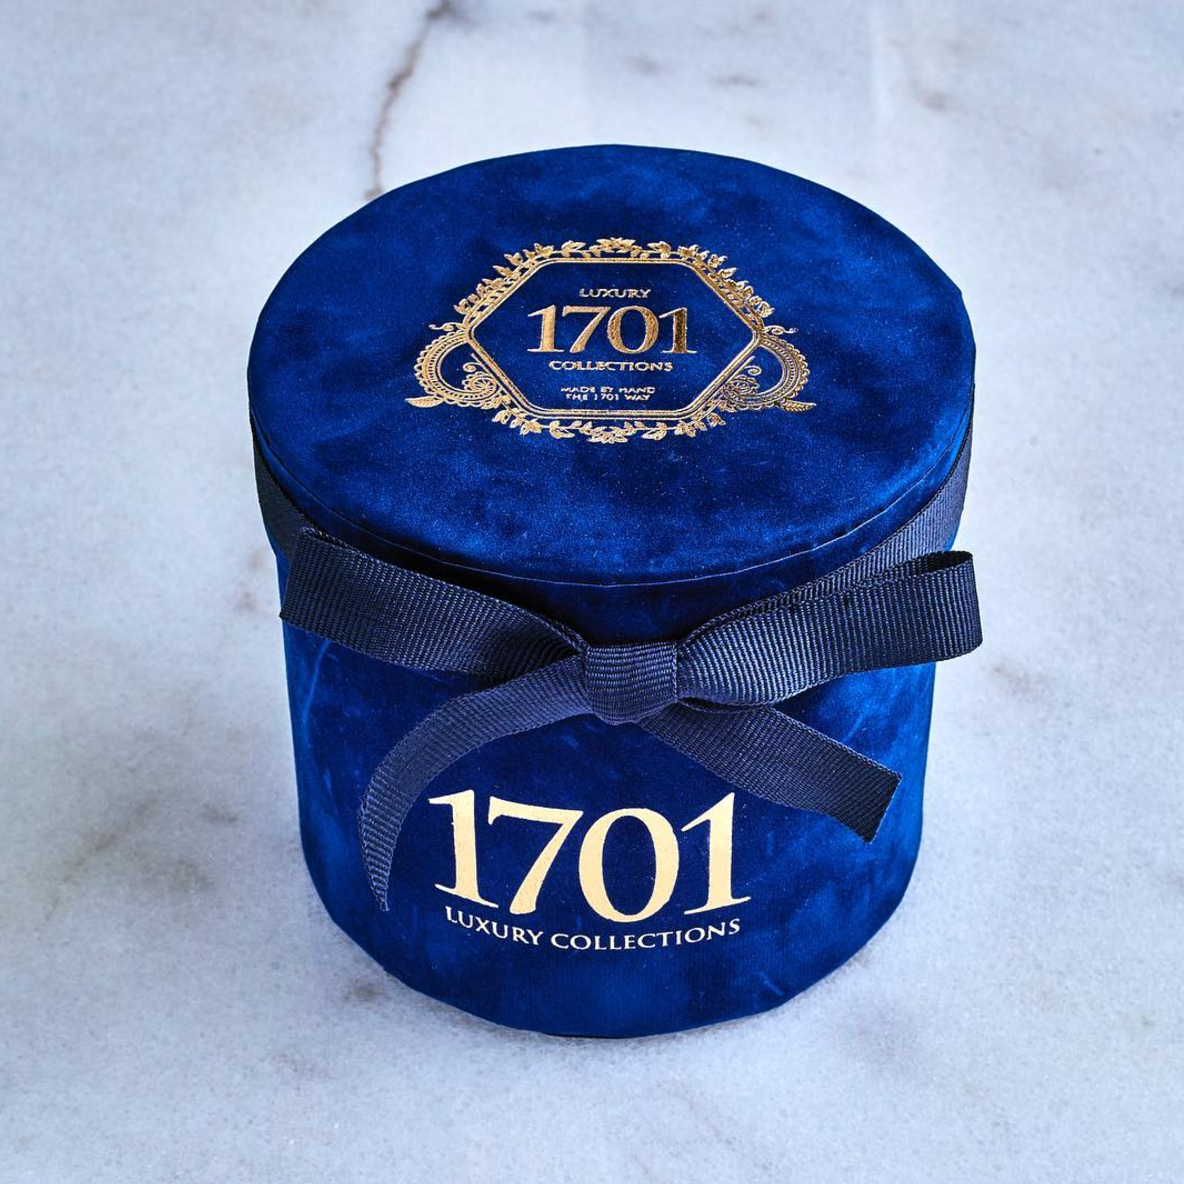 1701's luxury gift collection is perfect for Father's Day